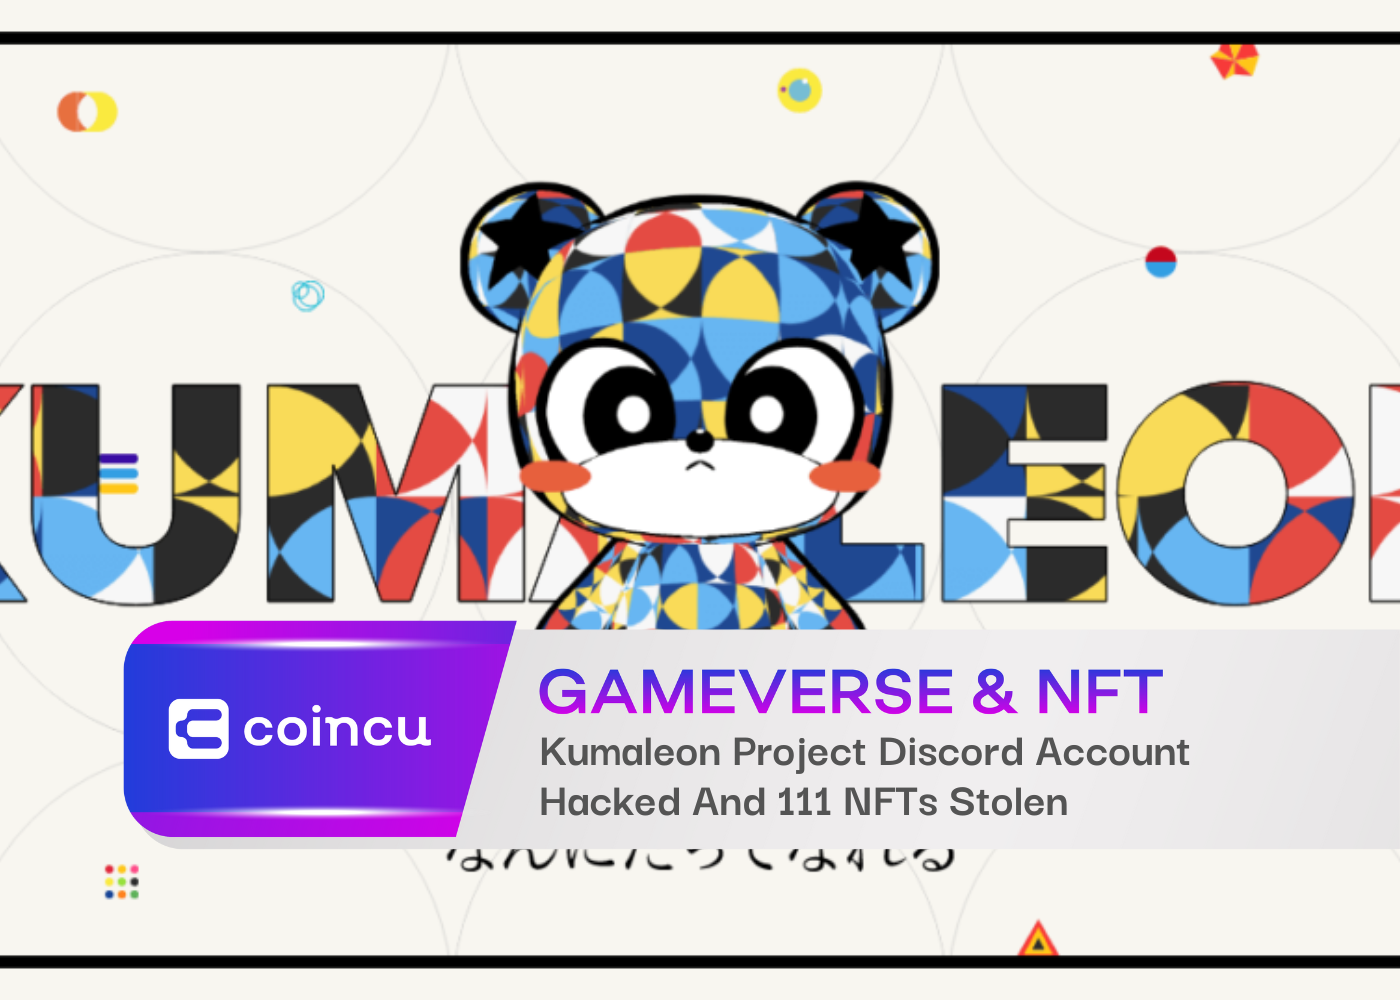 Kumaleon Project Discord Account Hacked And 111 NFTs Stolen